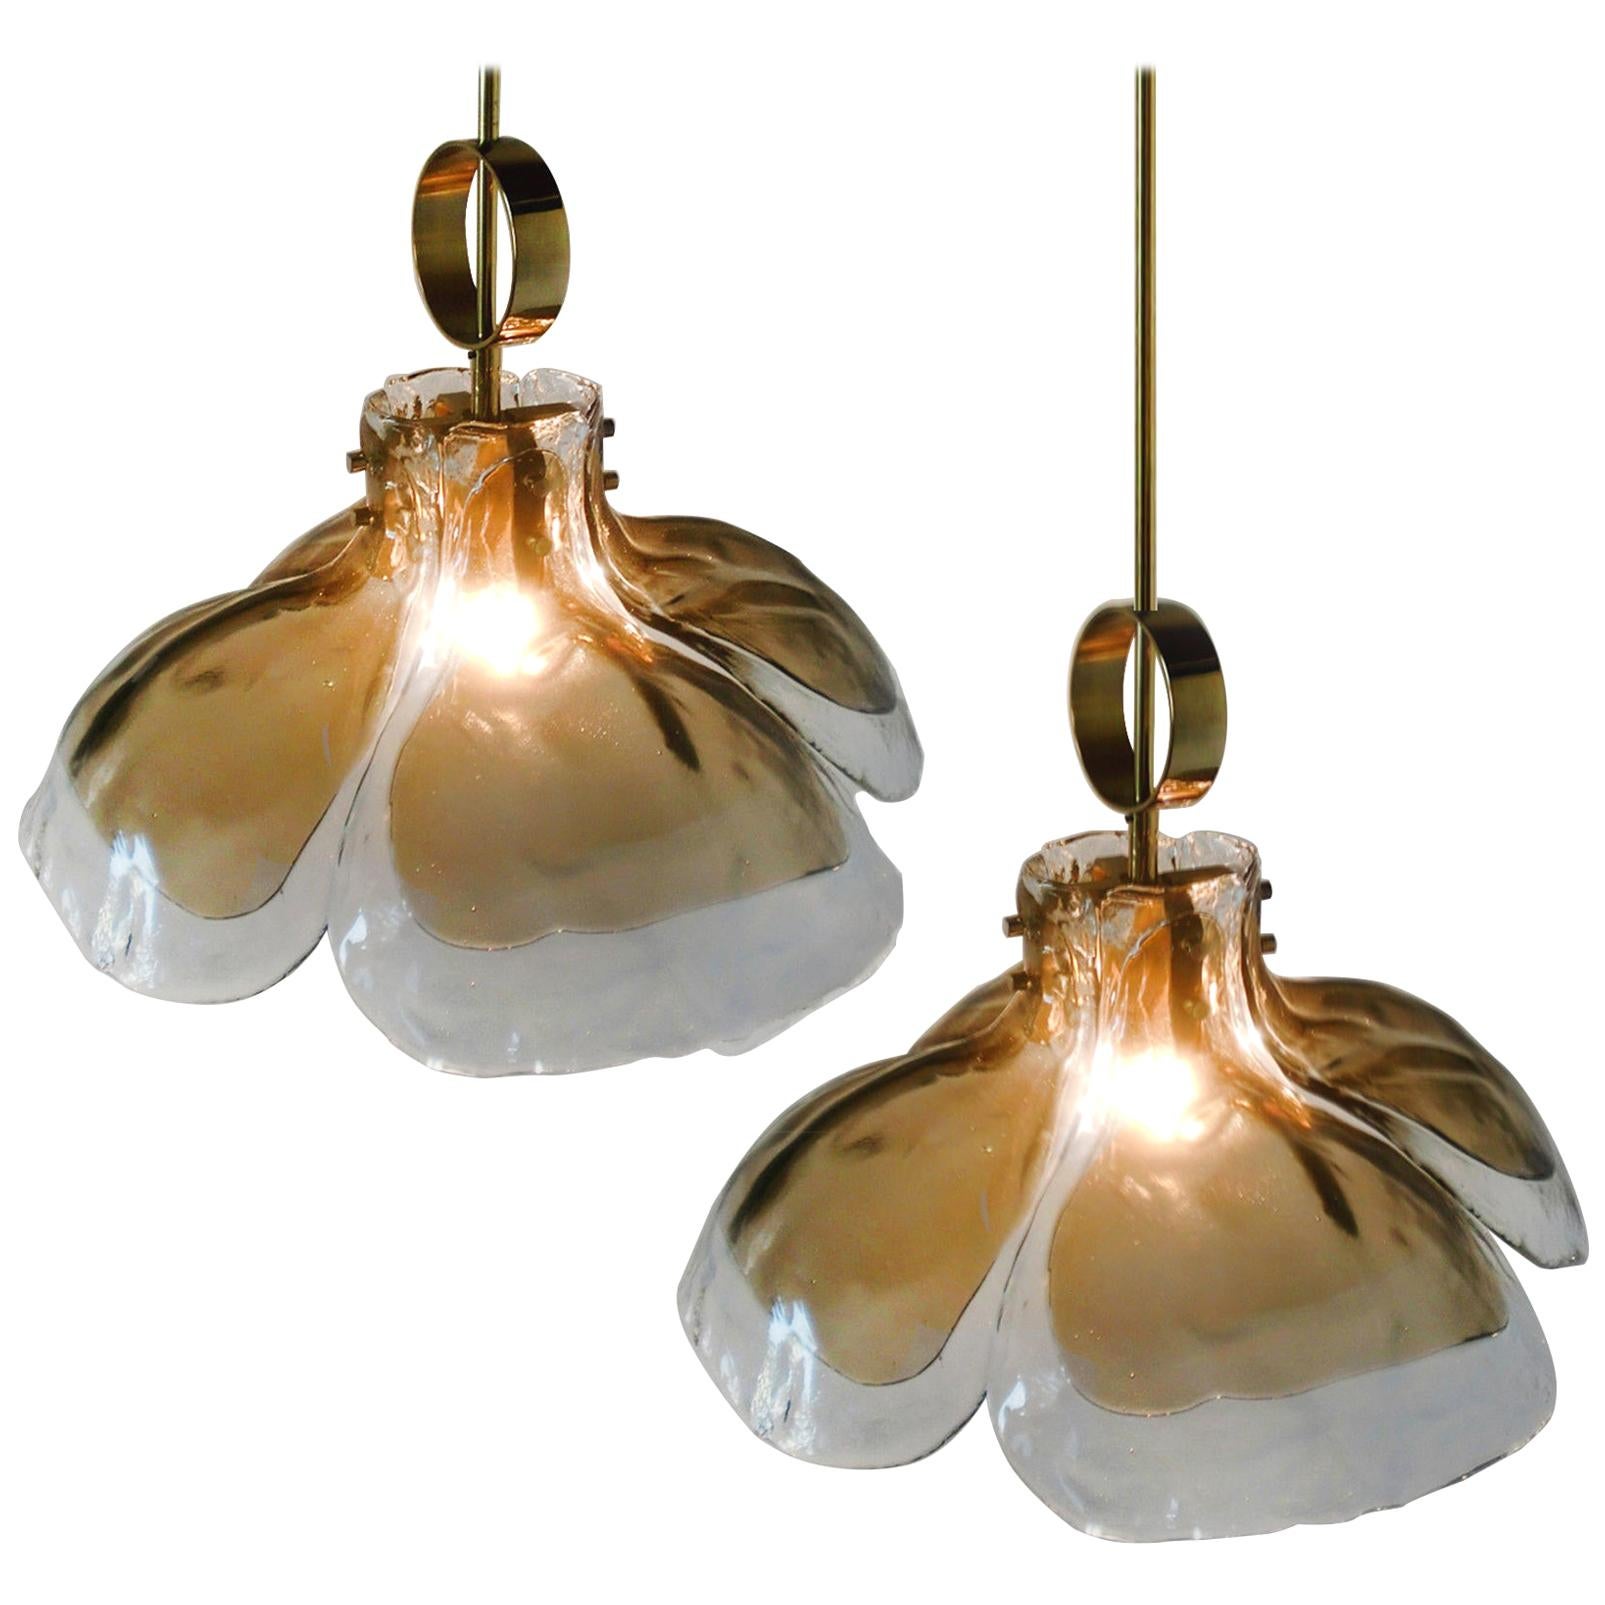 One of two beautiful midcentury brass chandeliers with four melting glass panels in the shape of a flower (diameter 20.7 inch / 51 cm). Illuminates beautifully.

Designed and executed by Kalmar Vienna in the 1970s. Hand blown melting glass, made